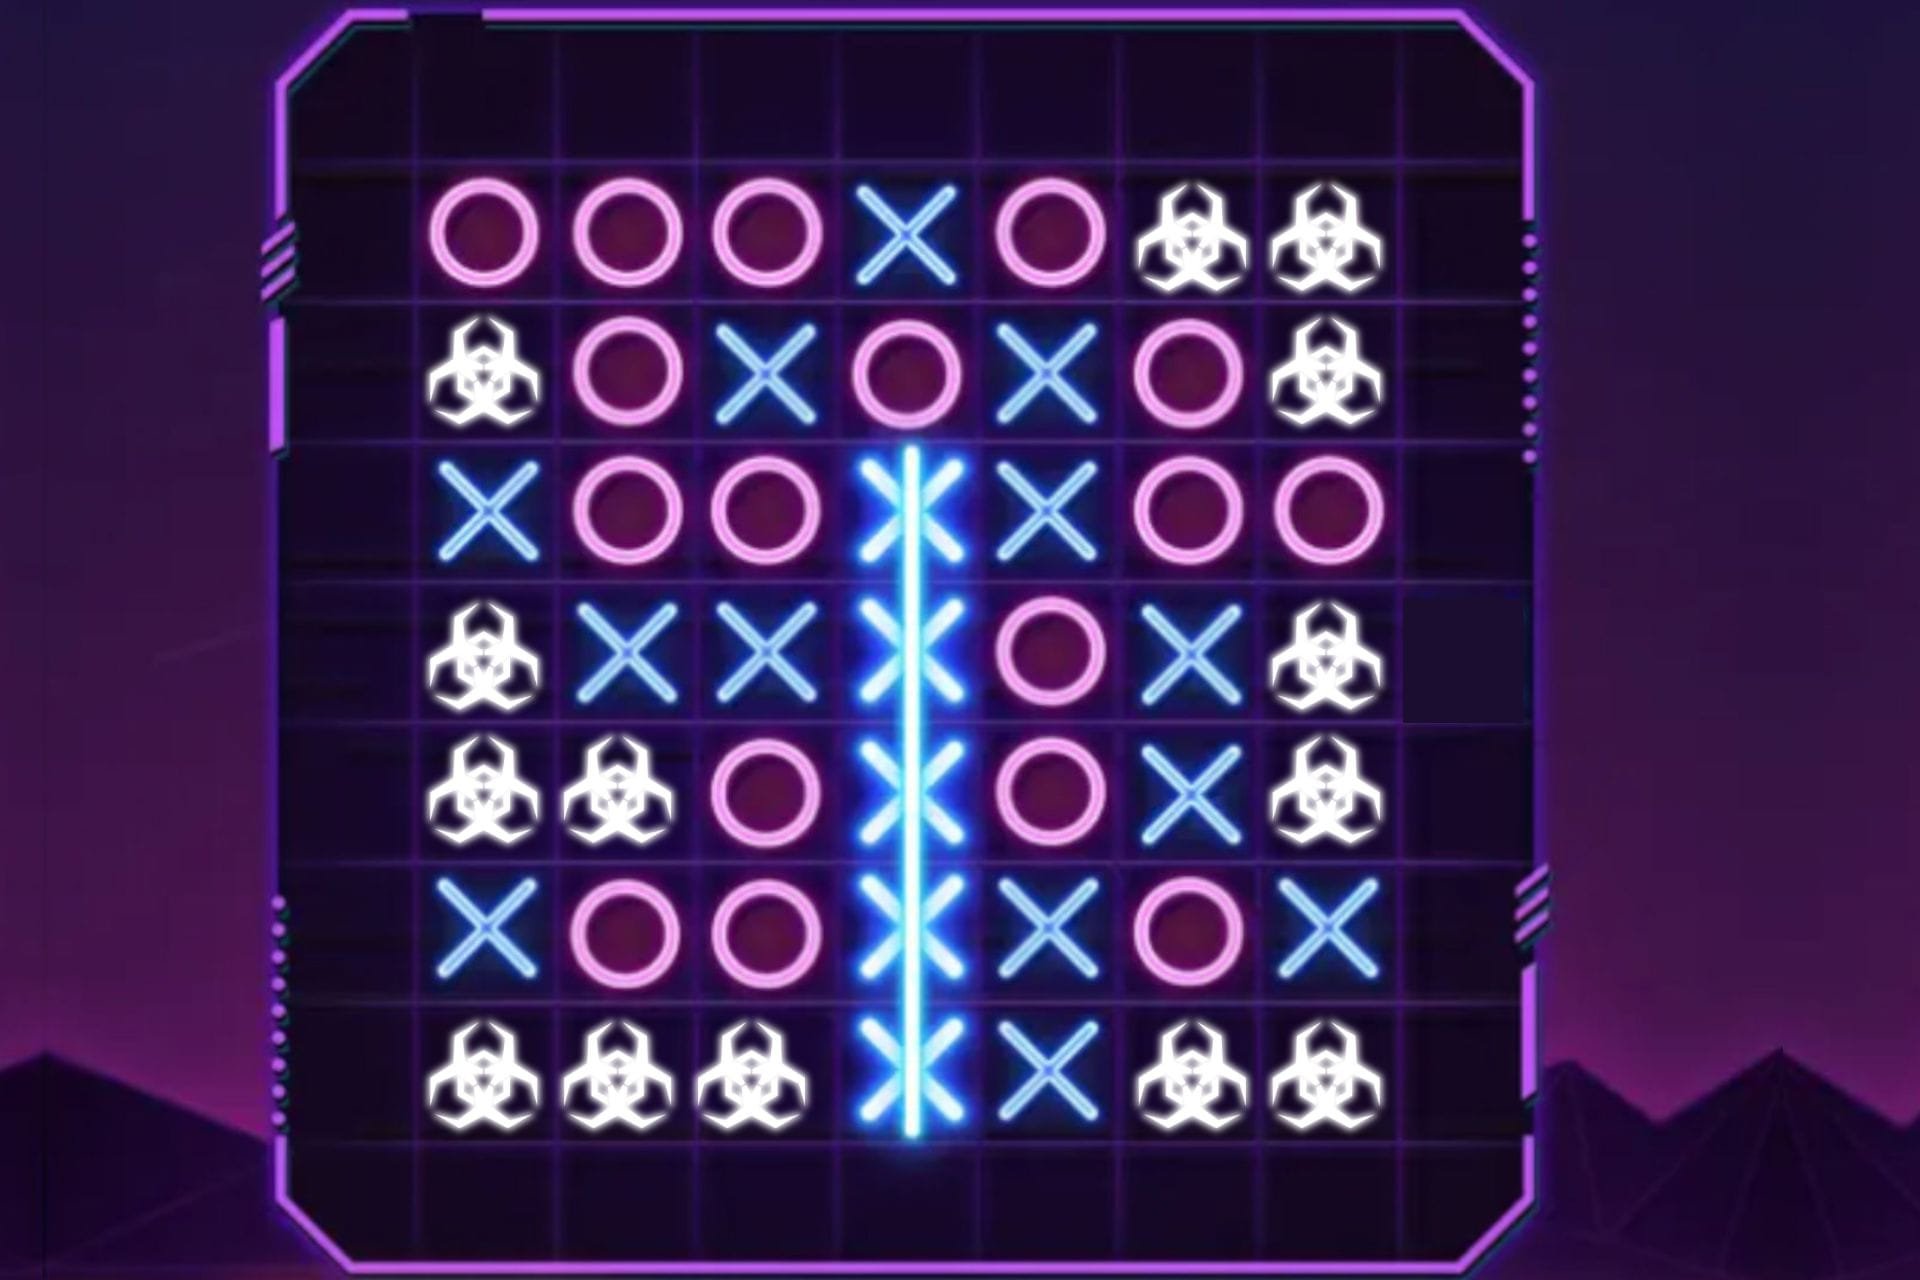 TicTacToe game featuring a malware logo across the board